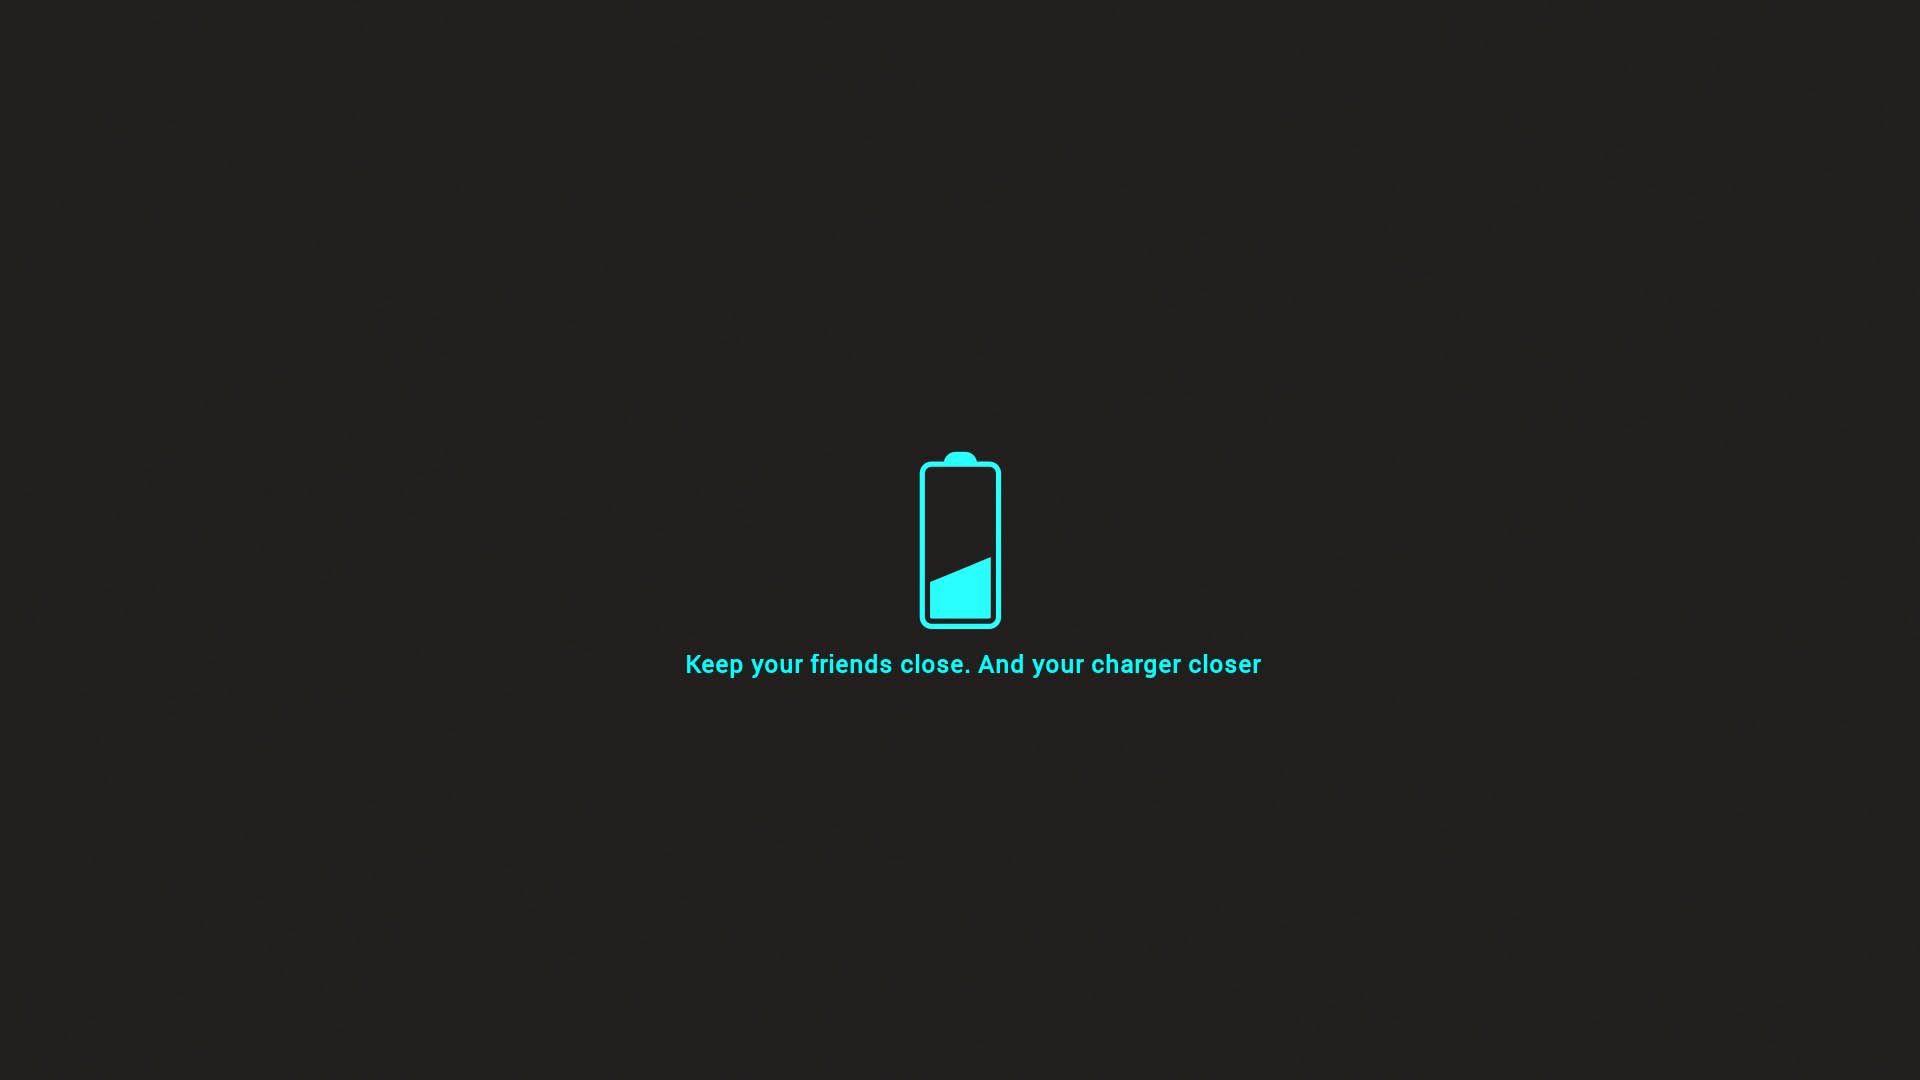 Keep your friends close. And your charger closer. wallpaper